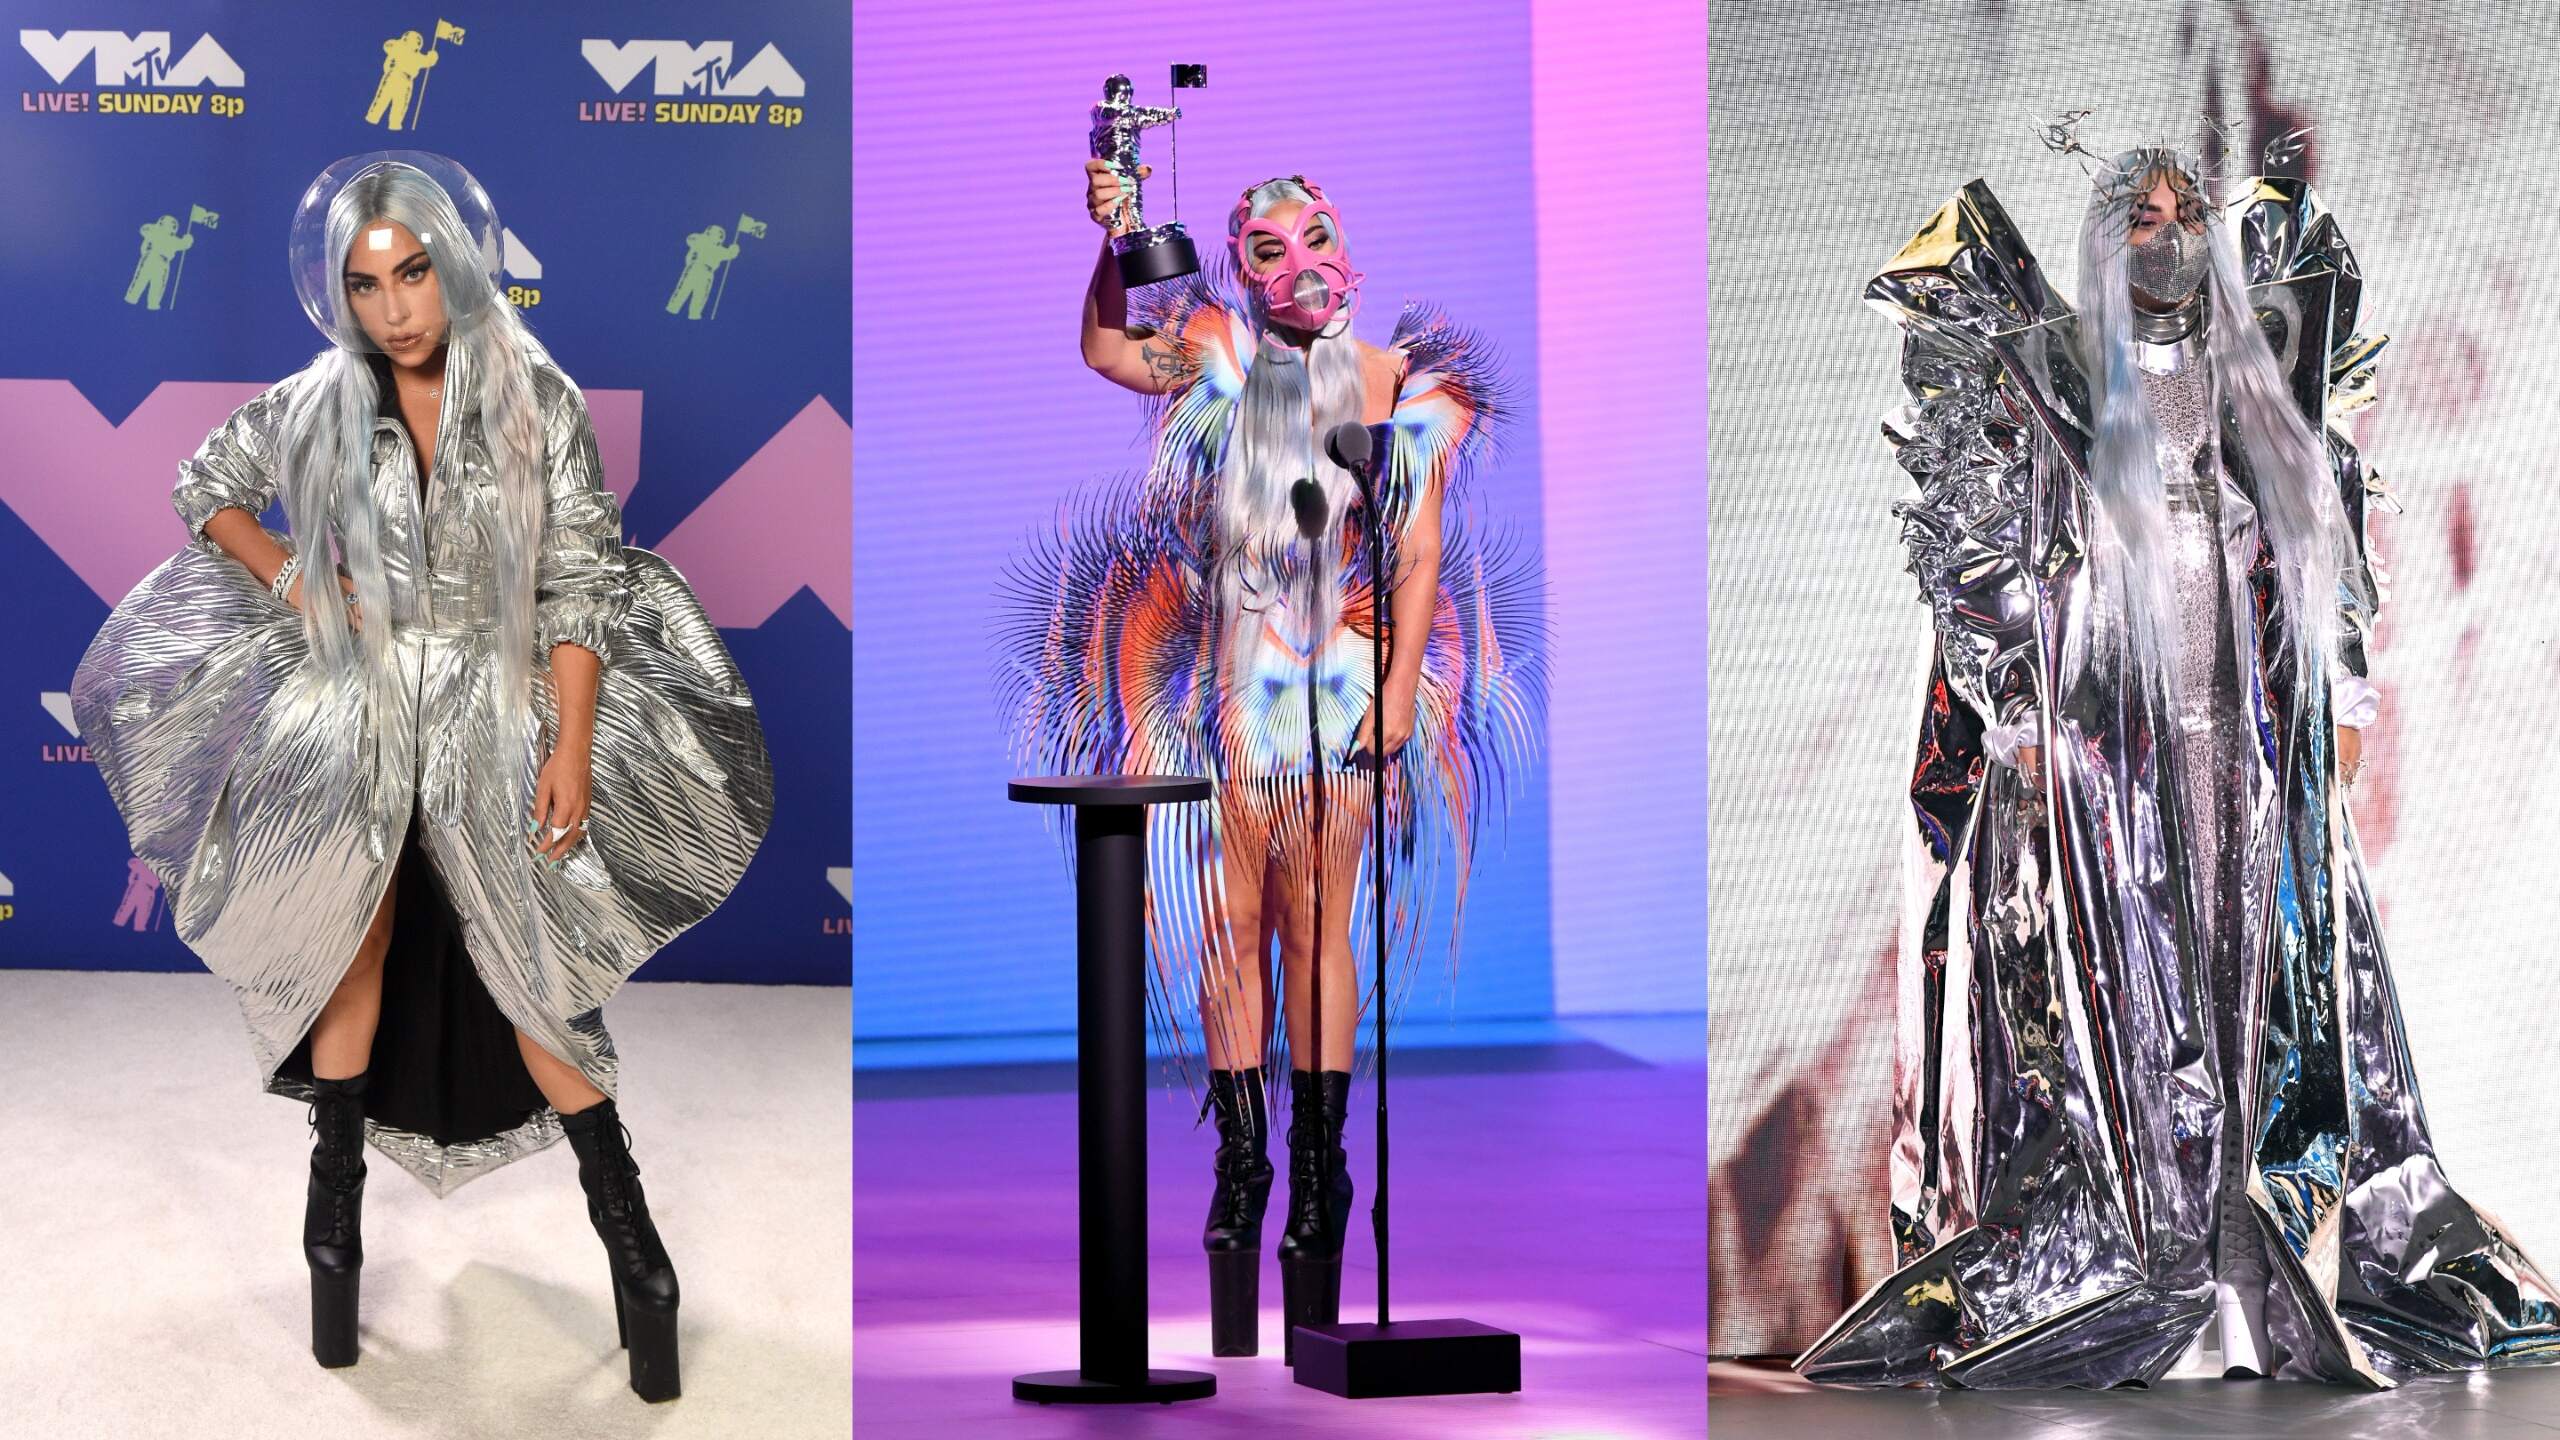 Singer Lady Gaga attends the 2020 MTV Video Music Awards wearing three different chrome outfits